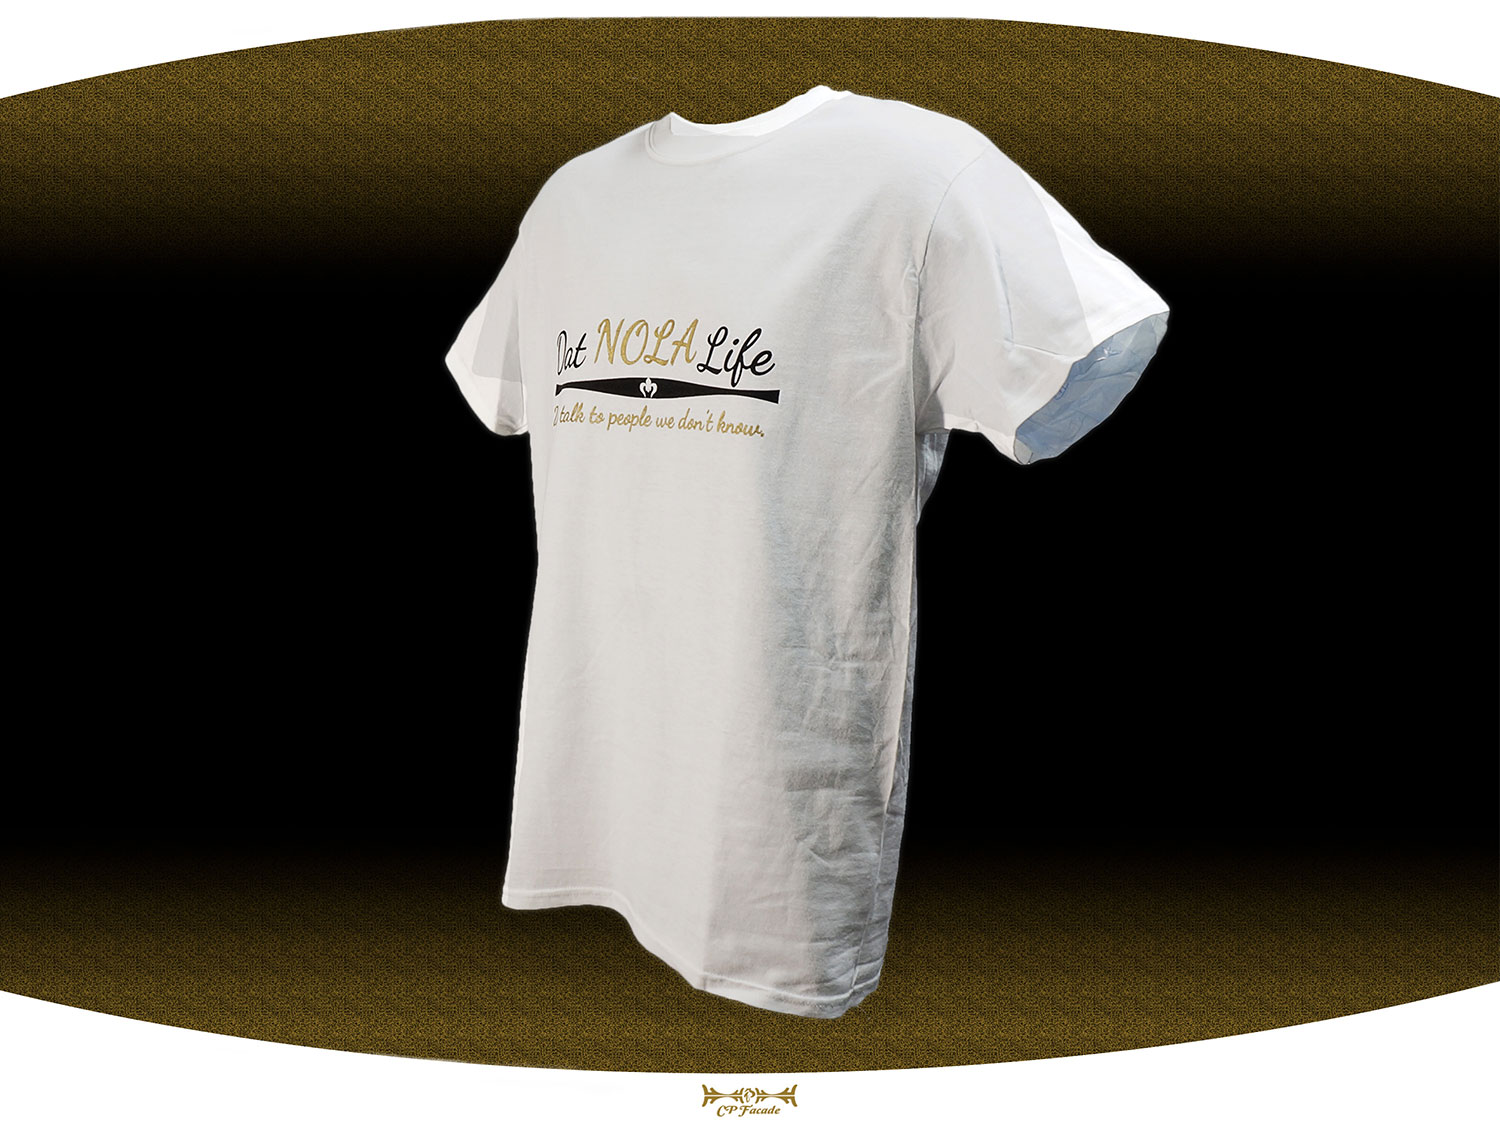 White screenprinted  t-shirt with the black and gold Dat Nola Life text across the chest 